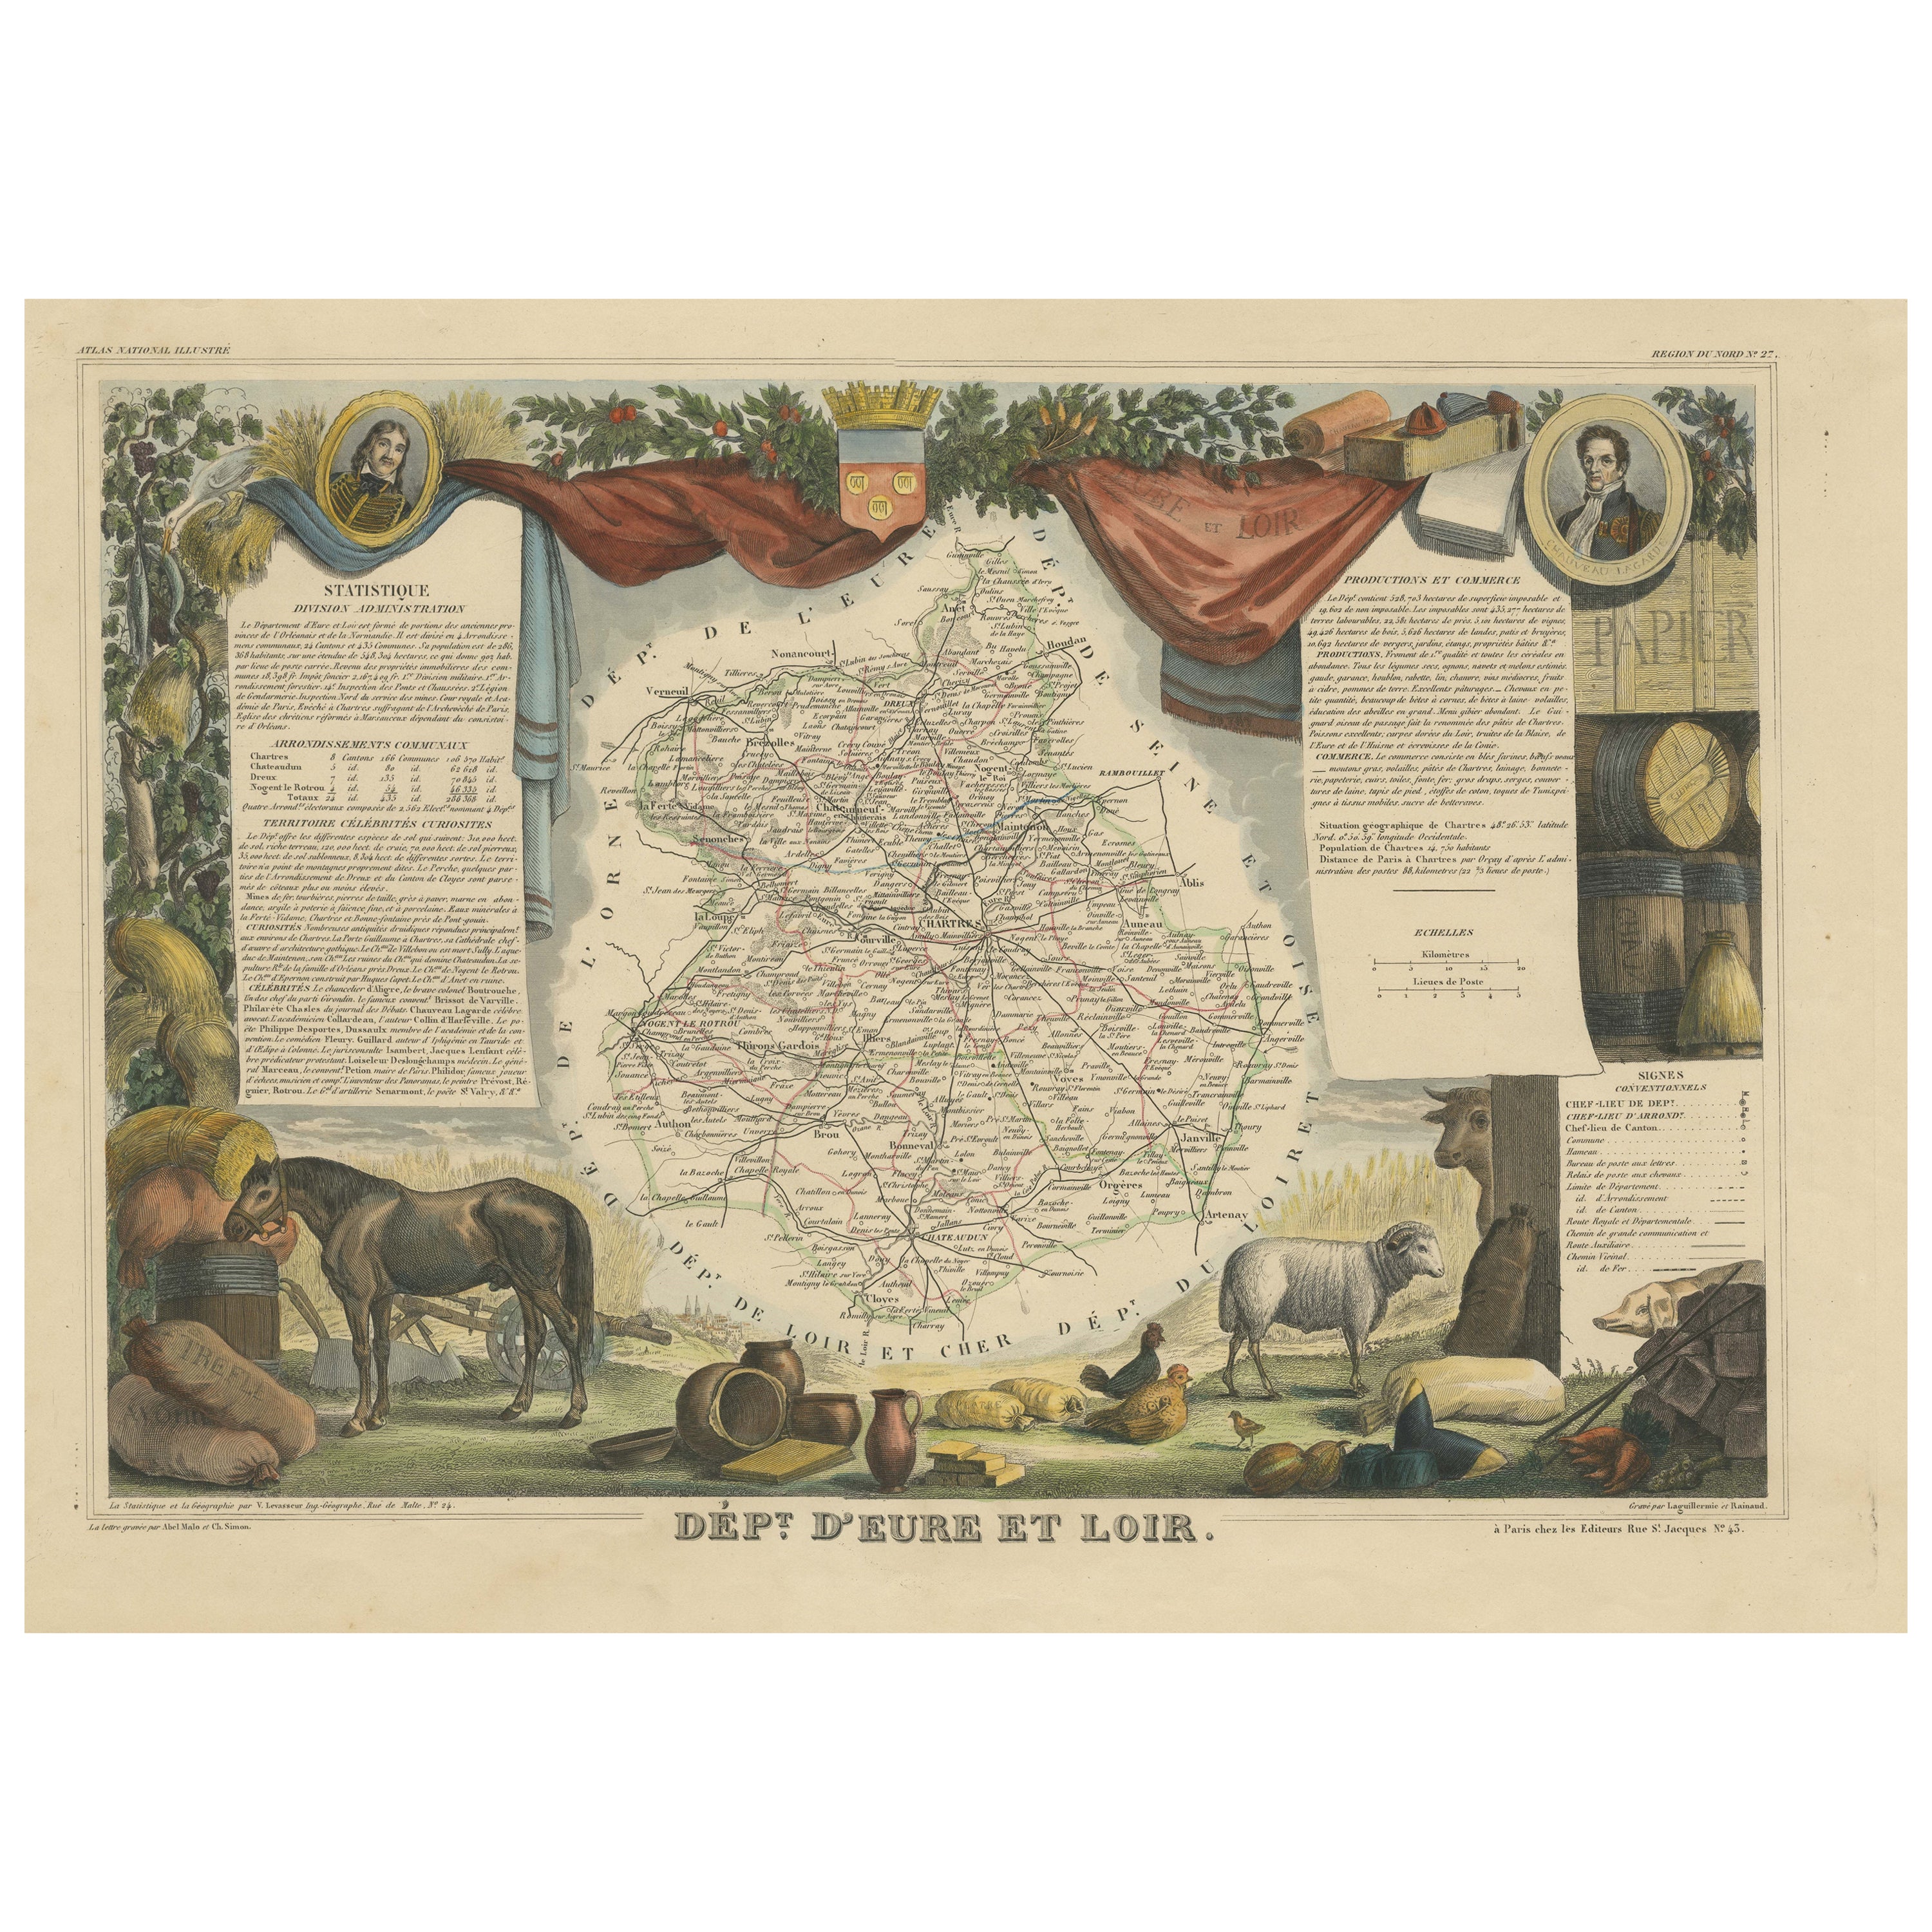 Old Map of the French Department of Eure-et-loir, France For Sale